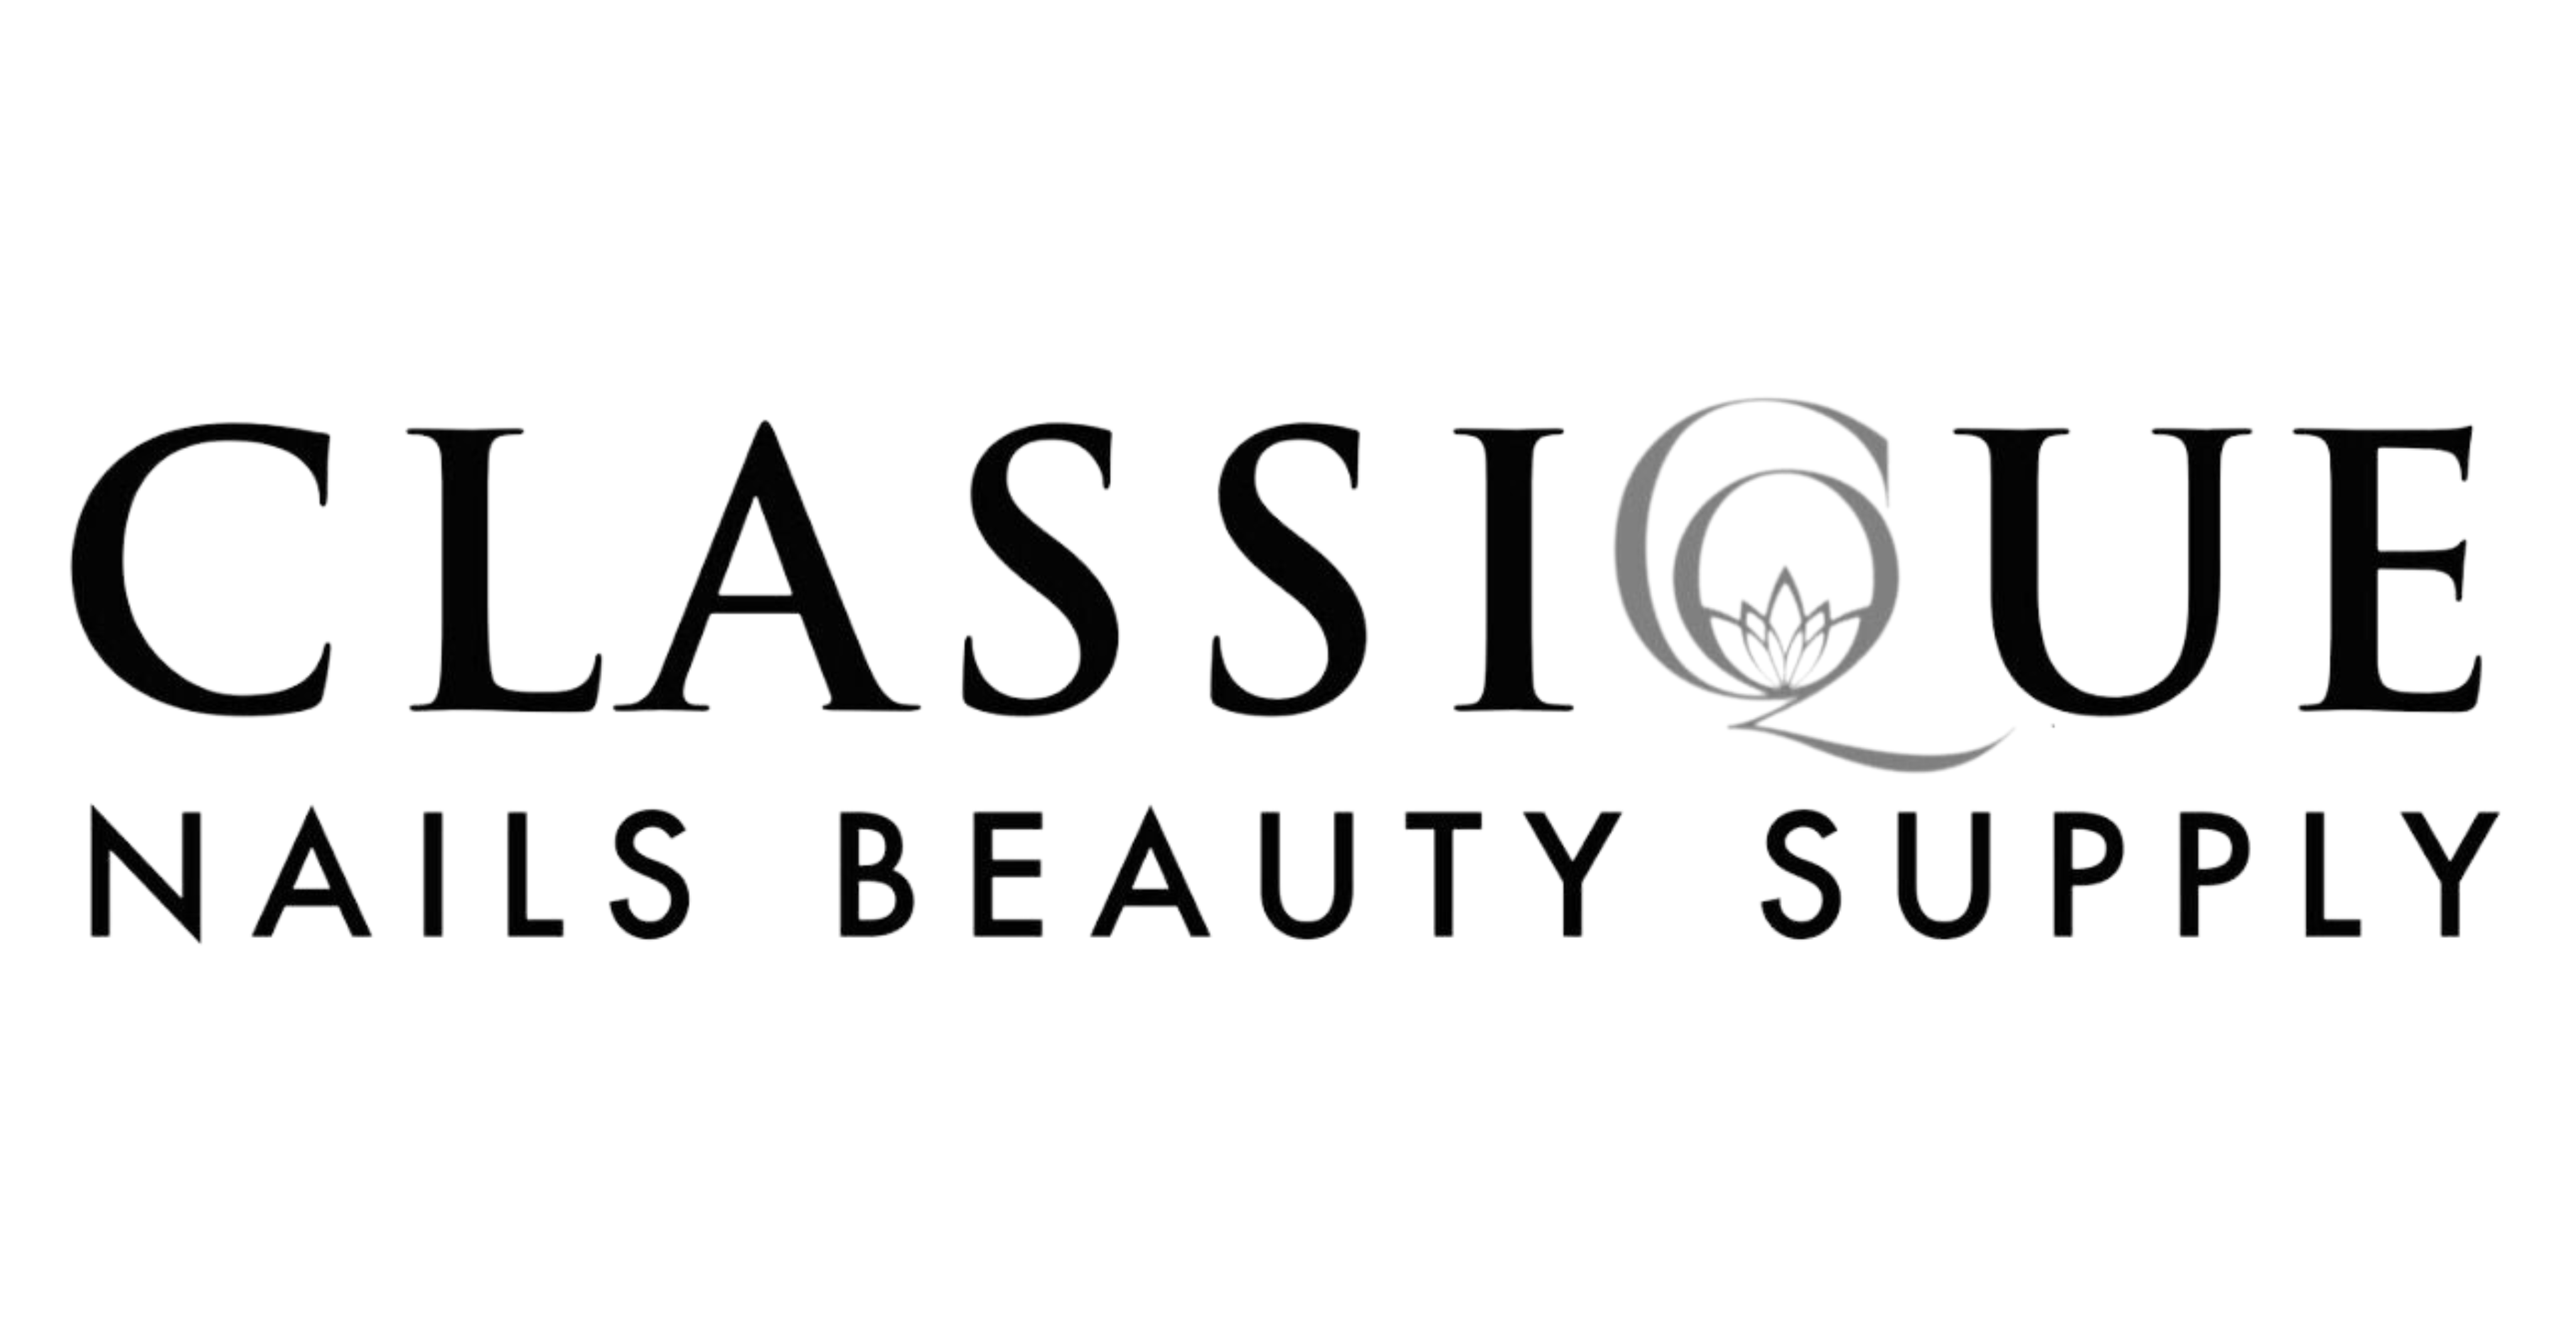 classique nails beauty supply, nail supply near me, nail supply store near me, canada nail supply, hair supply store near me, best korean skin care products